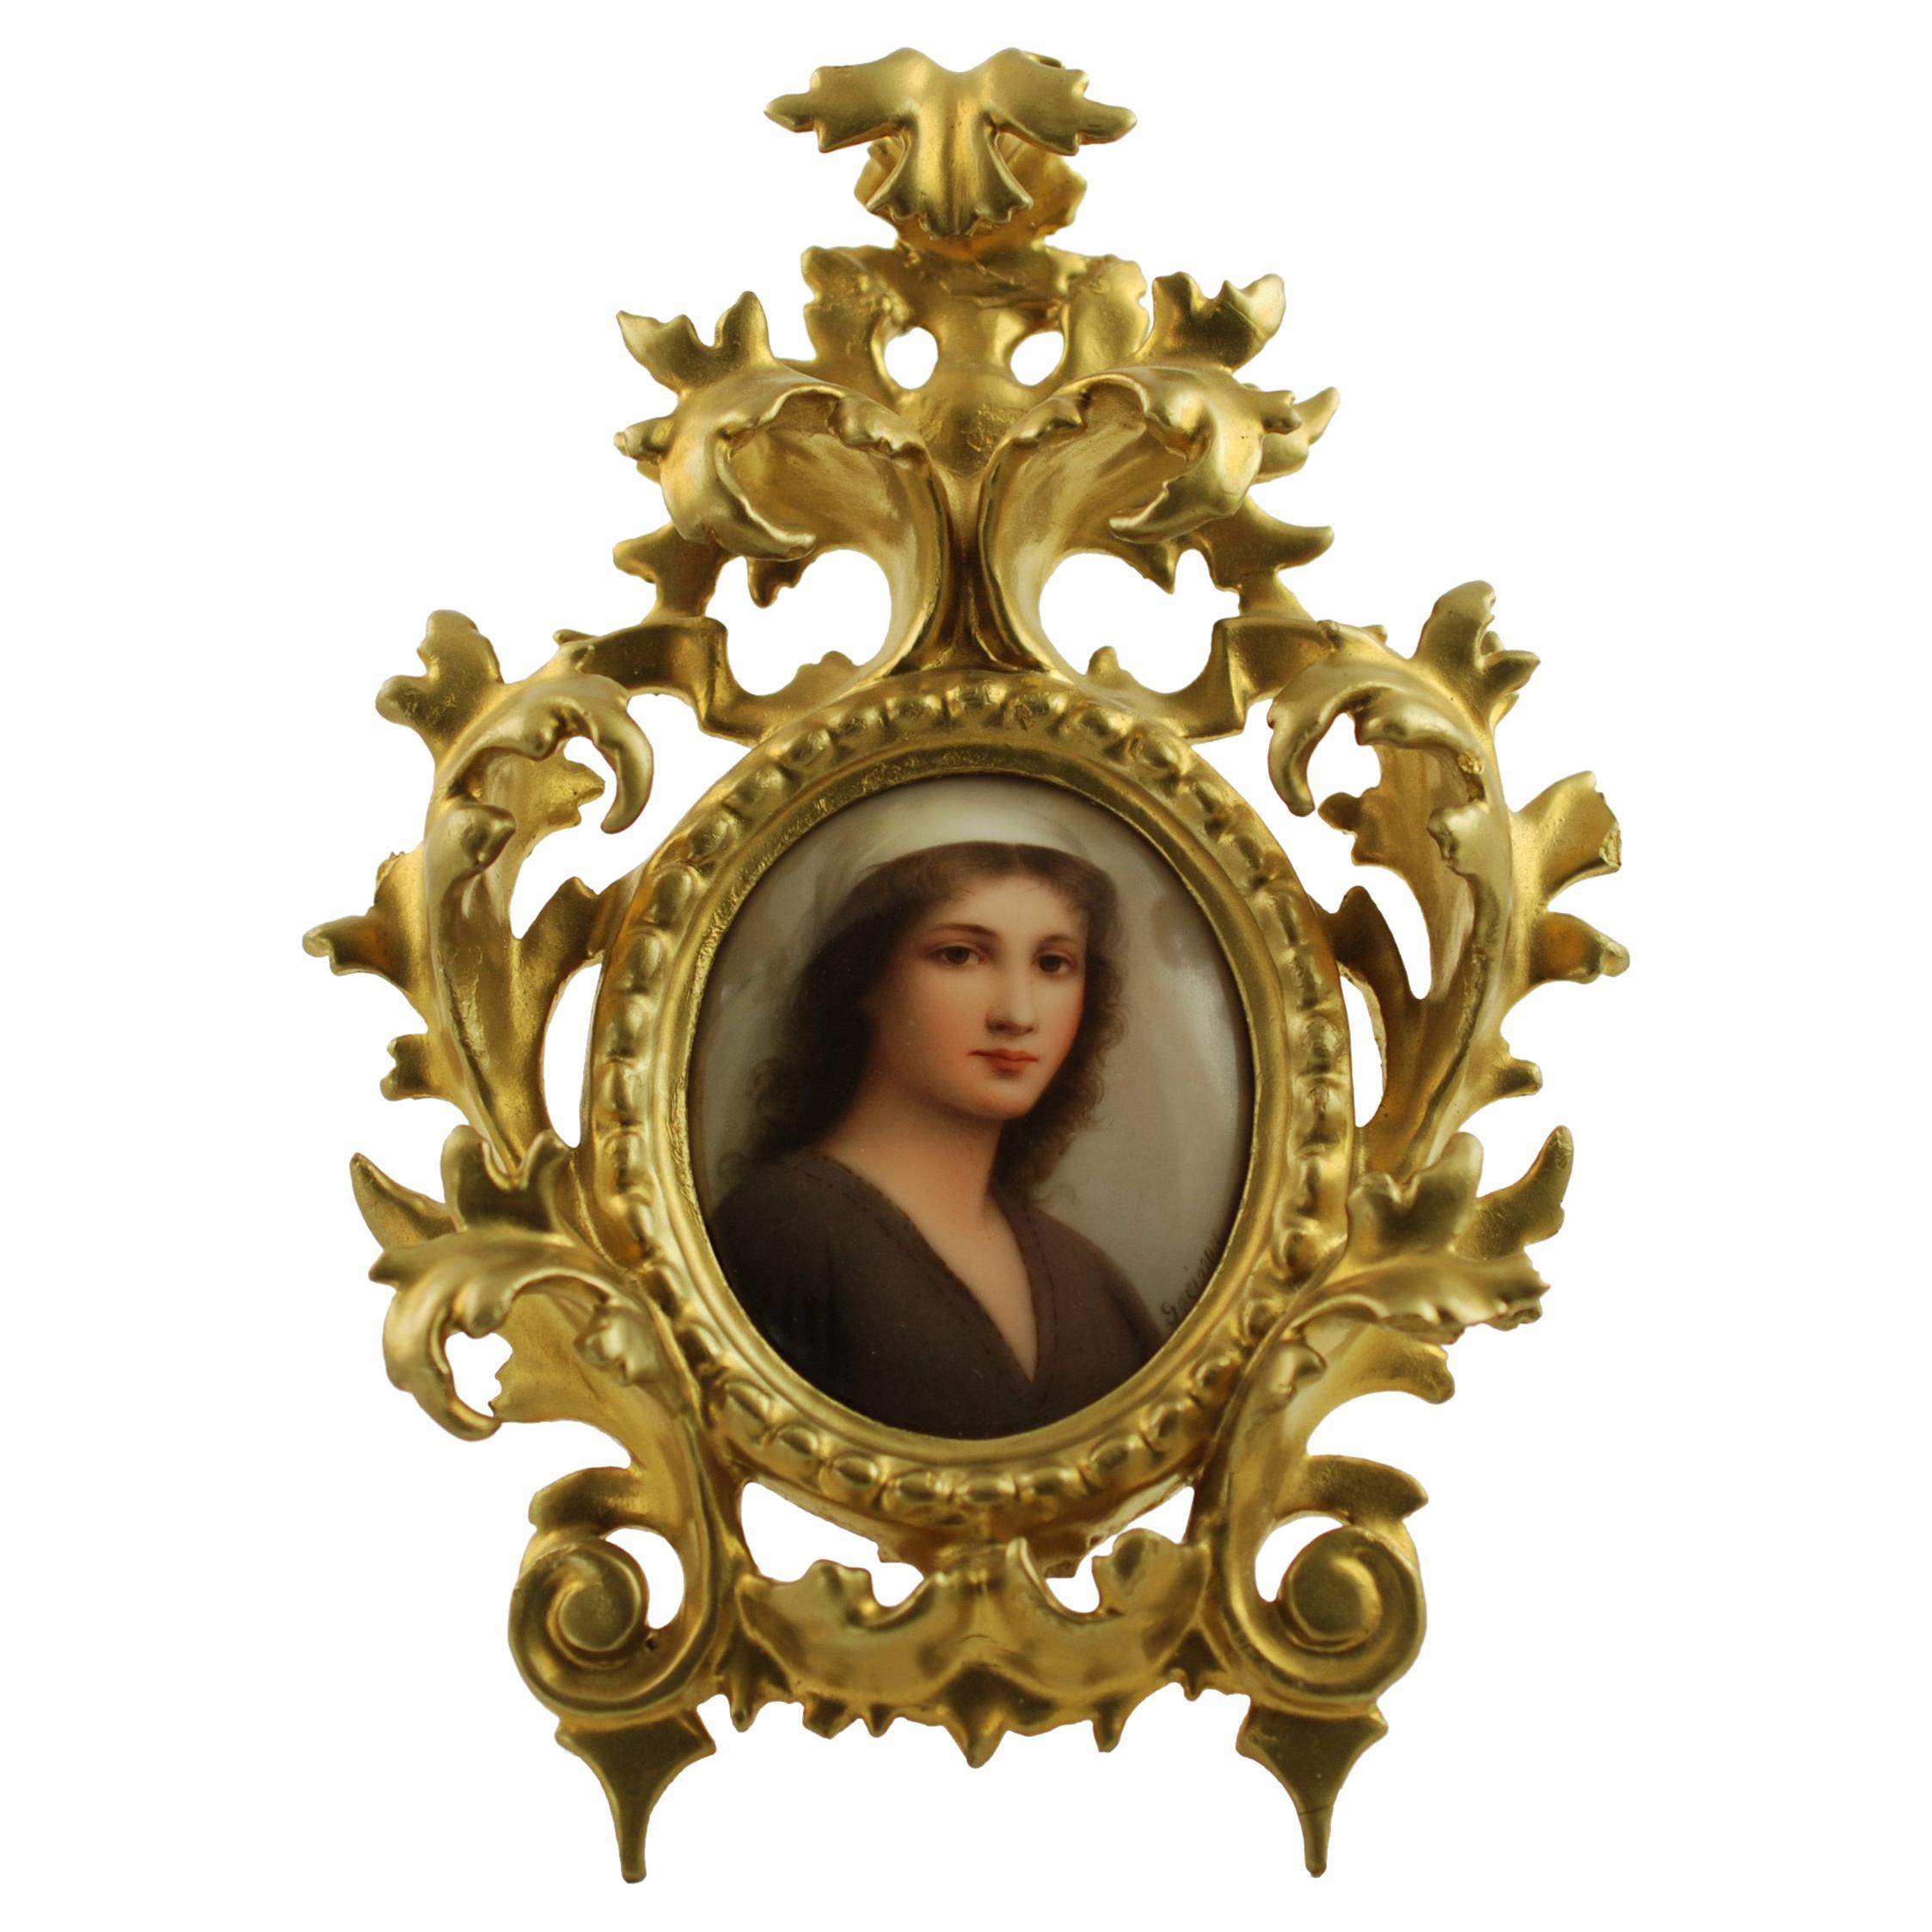 19th Century C. M. Hutschenreuther Hand-Painted Porcelain Plaque "Ruth" For Sale